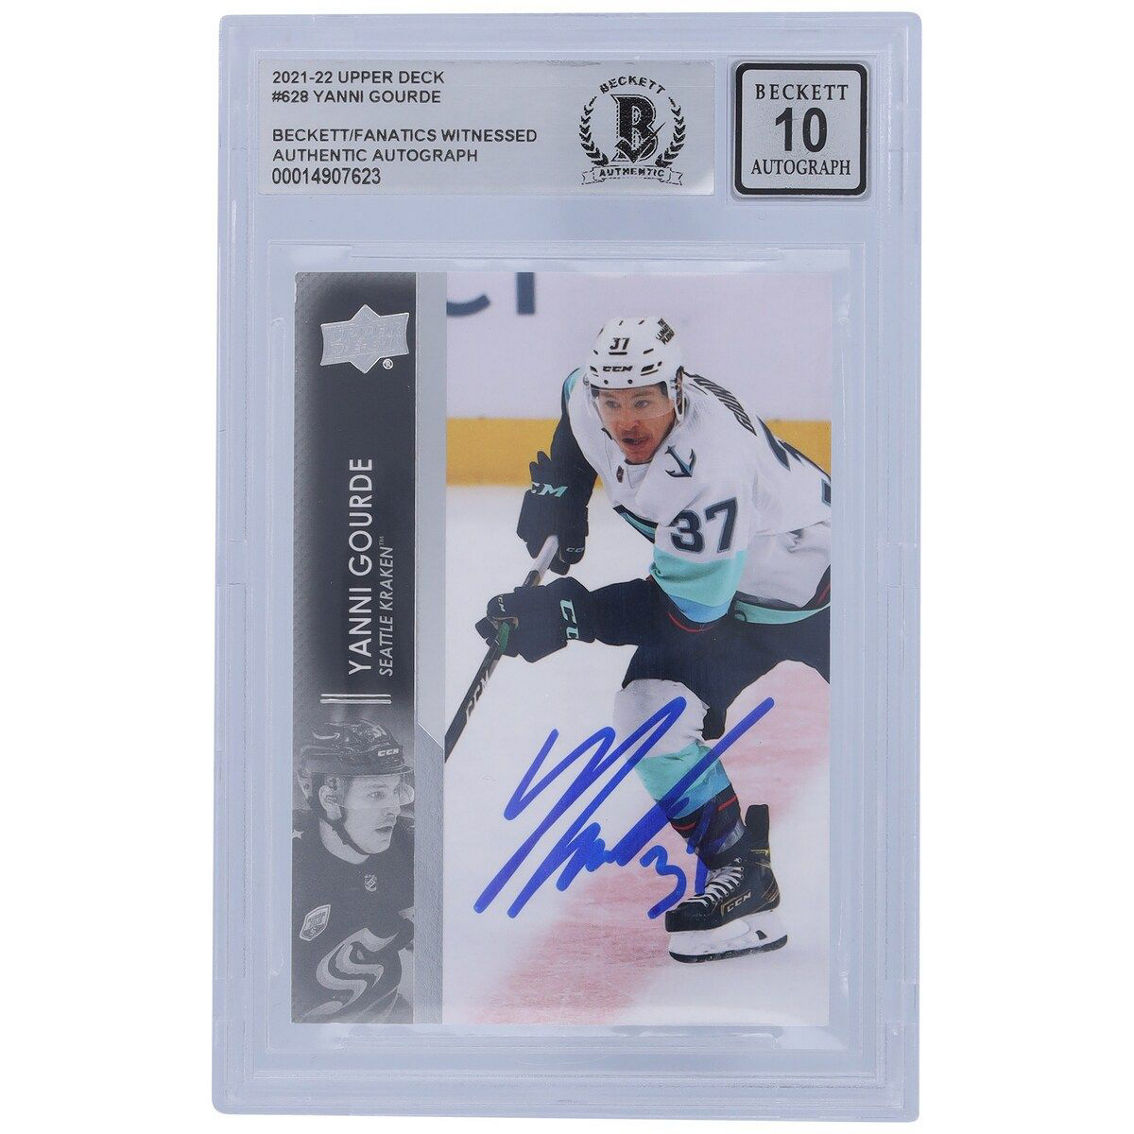 Upper Deck Yanni Gourde Seattle Kraken Autographed 2021-22 Upper Deck Extended Series #628 Beckett Fanatics Witnessed Authenticated 10 Card - Image 2 of 3